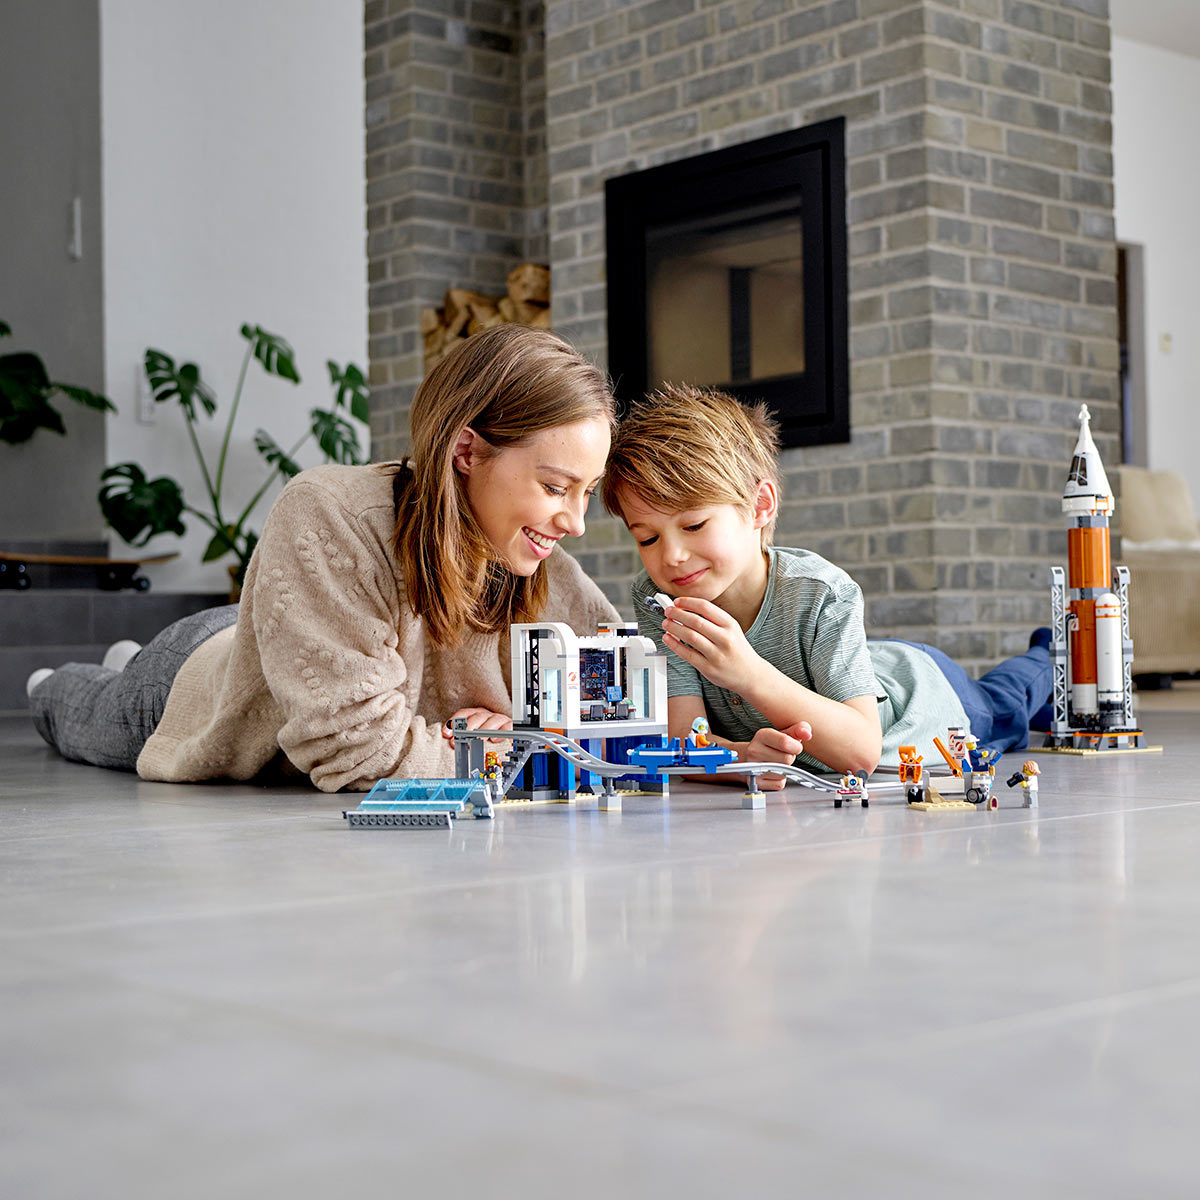 Lifestyle image of children playing with the deep space rocket with launch control